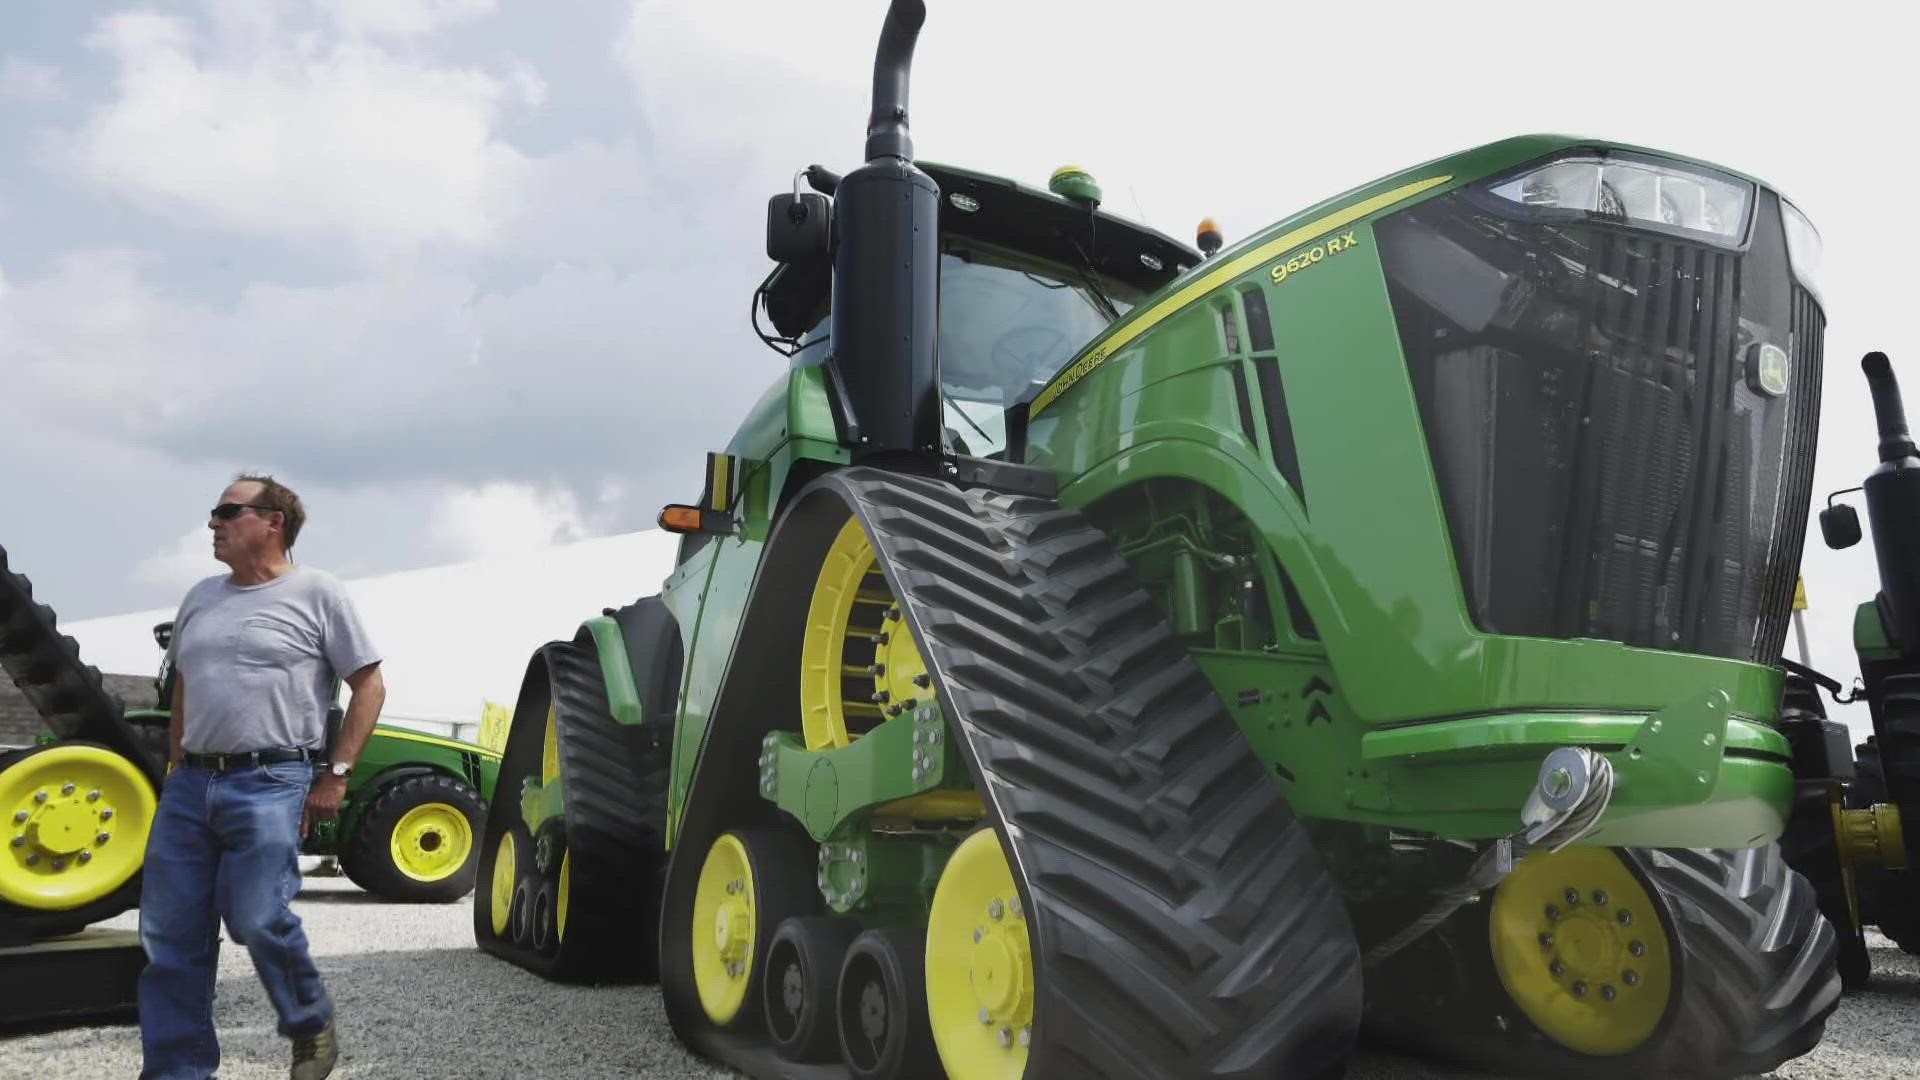 In Ottumwa, many residents have some sort of connection to the John Deere plant, and many are concerned about what a strike could mean for their community.